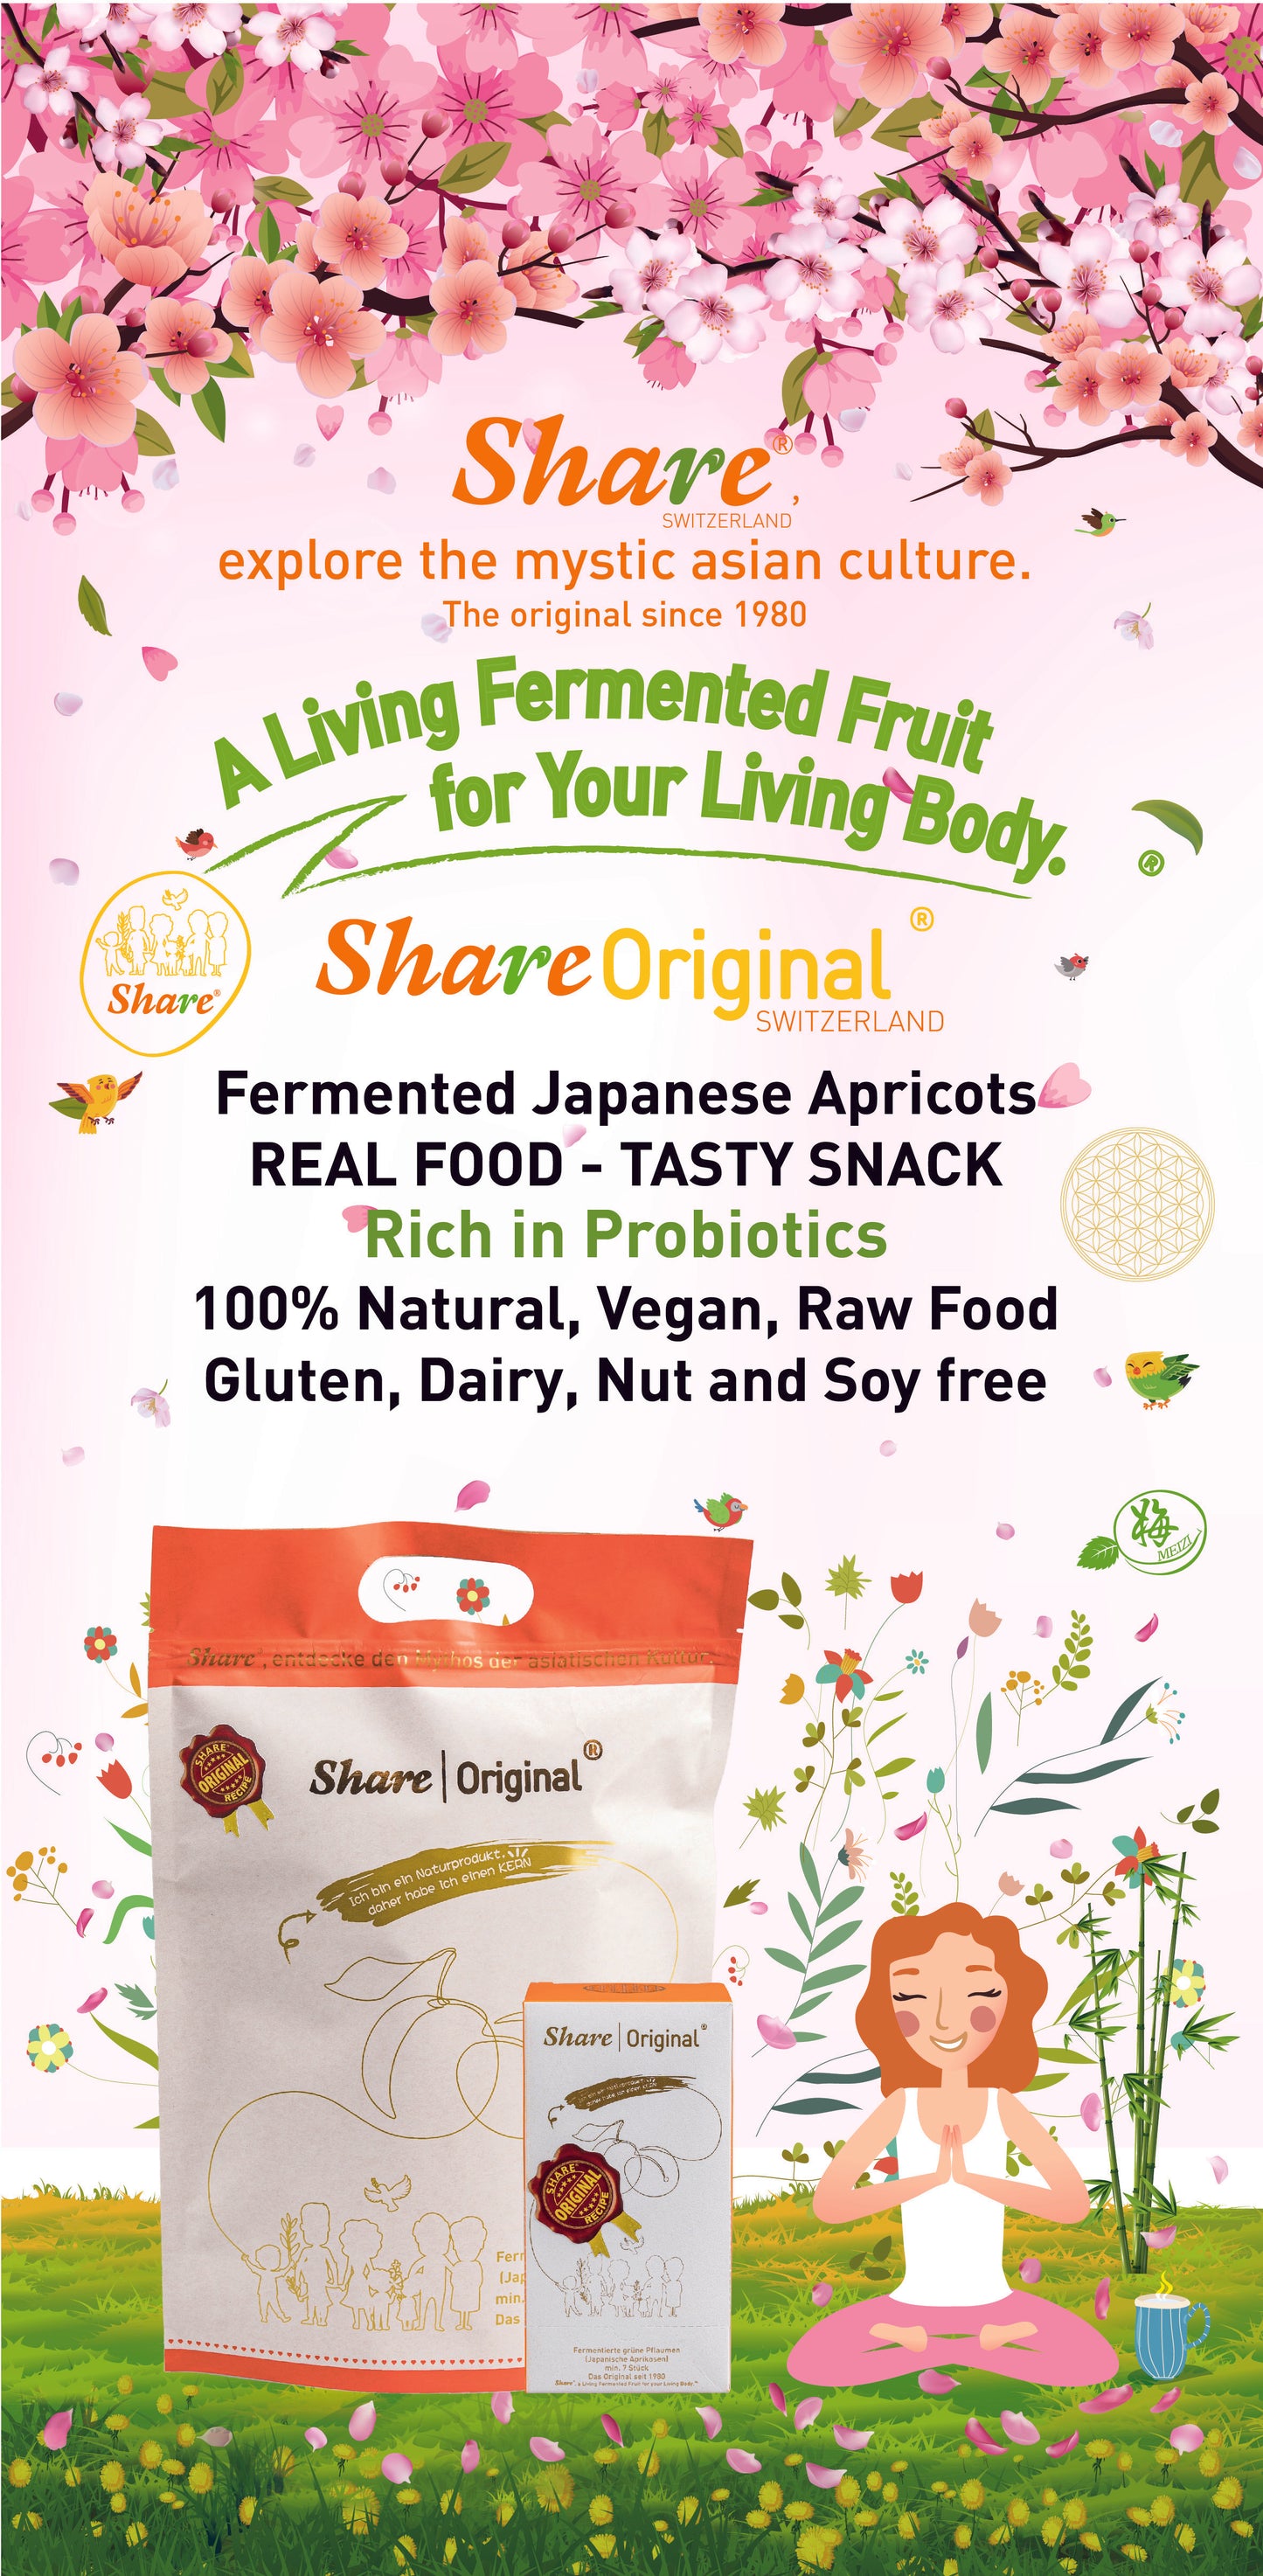 Share Original® Fermented Japanese Apricot (7-Piece Starter Box): Effective Natural Alternative to Lab-Made Laxatives and Probiotics, 30-Month Natural Fermented Fruit, Vegan & Non-GMO, Individually Wrapped Packet (Made in Switzerland, Free Shipping)